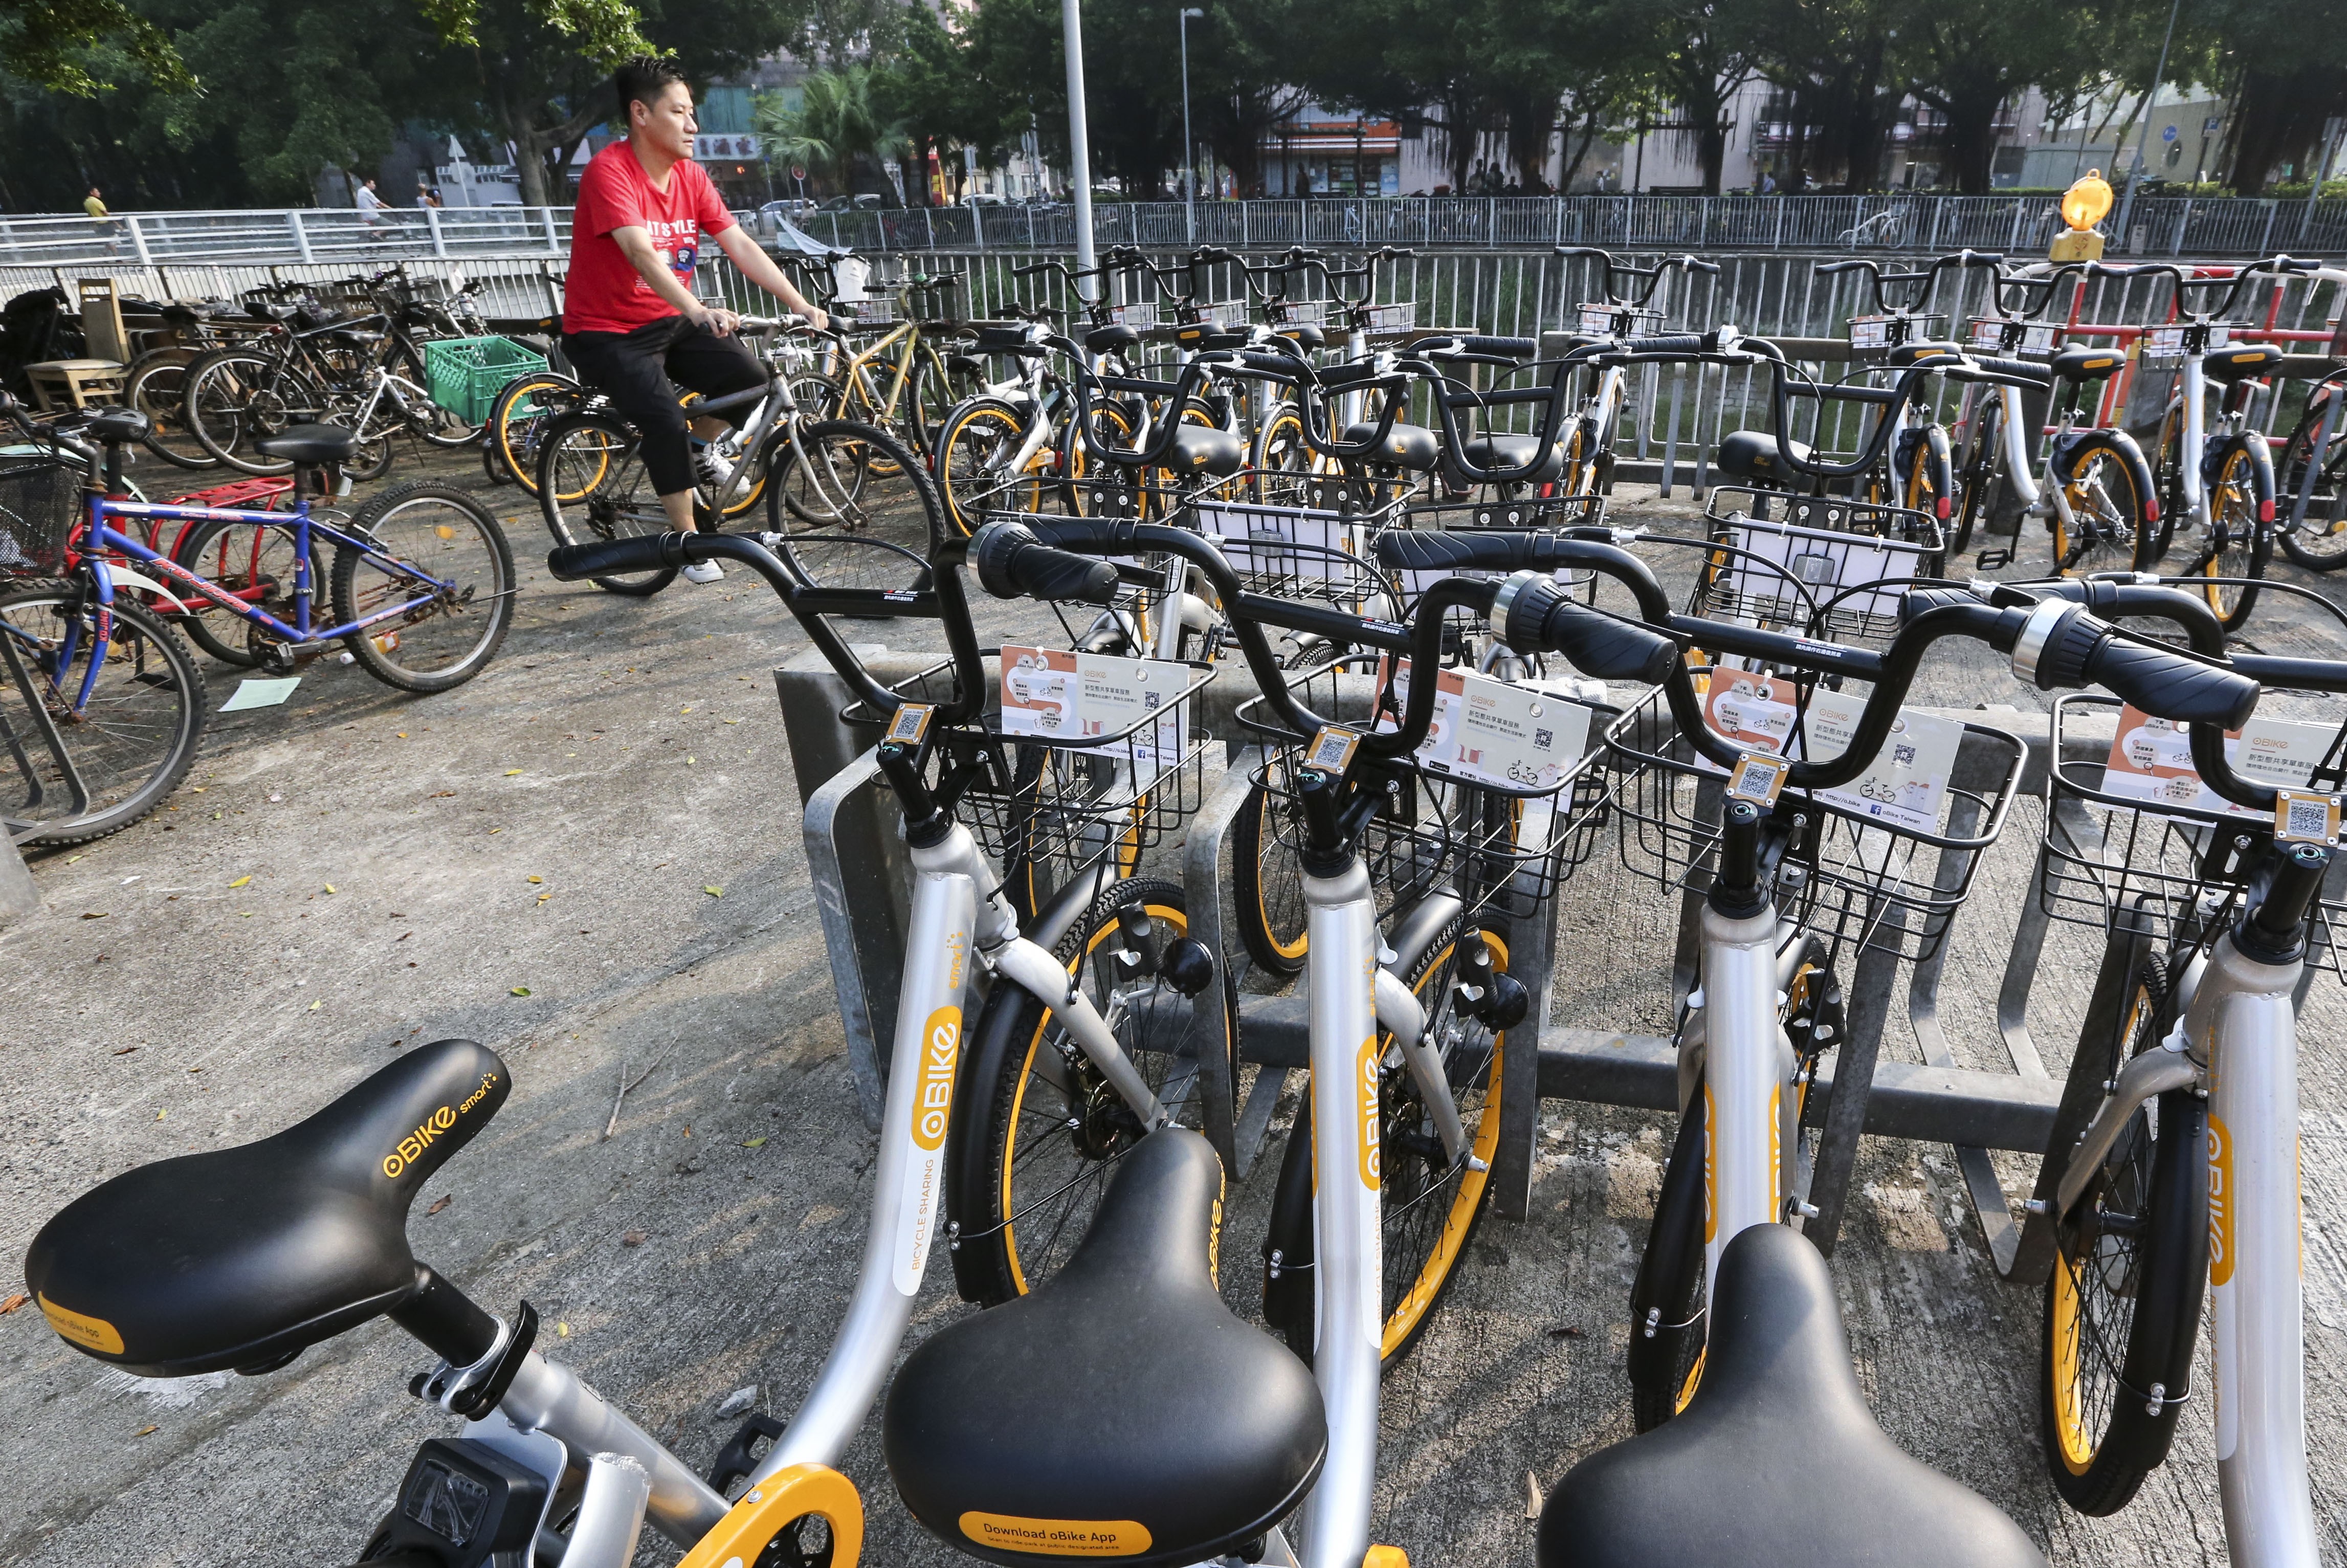 Bike-sharing on mobile app was only introduced in Hong Kong a few months ago. Photo: David Wong